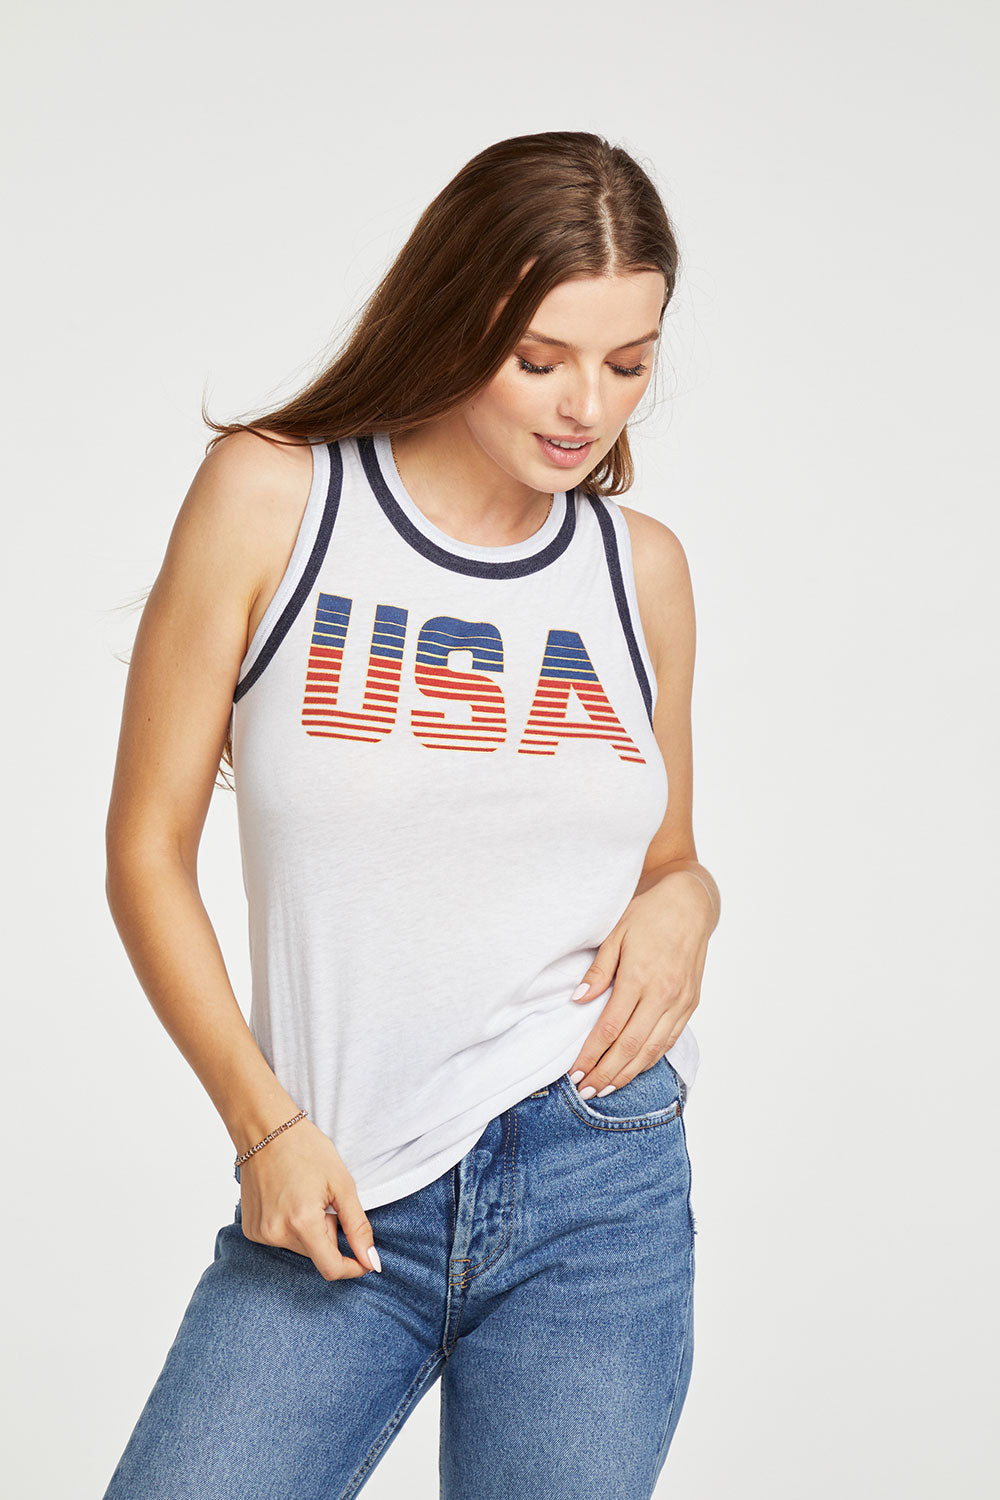 Usa WOMENS - chaserbrand